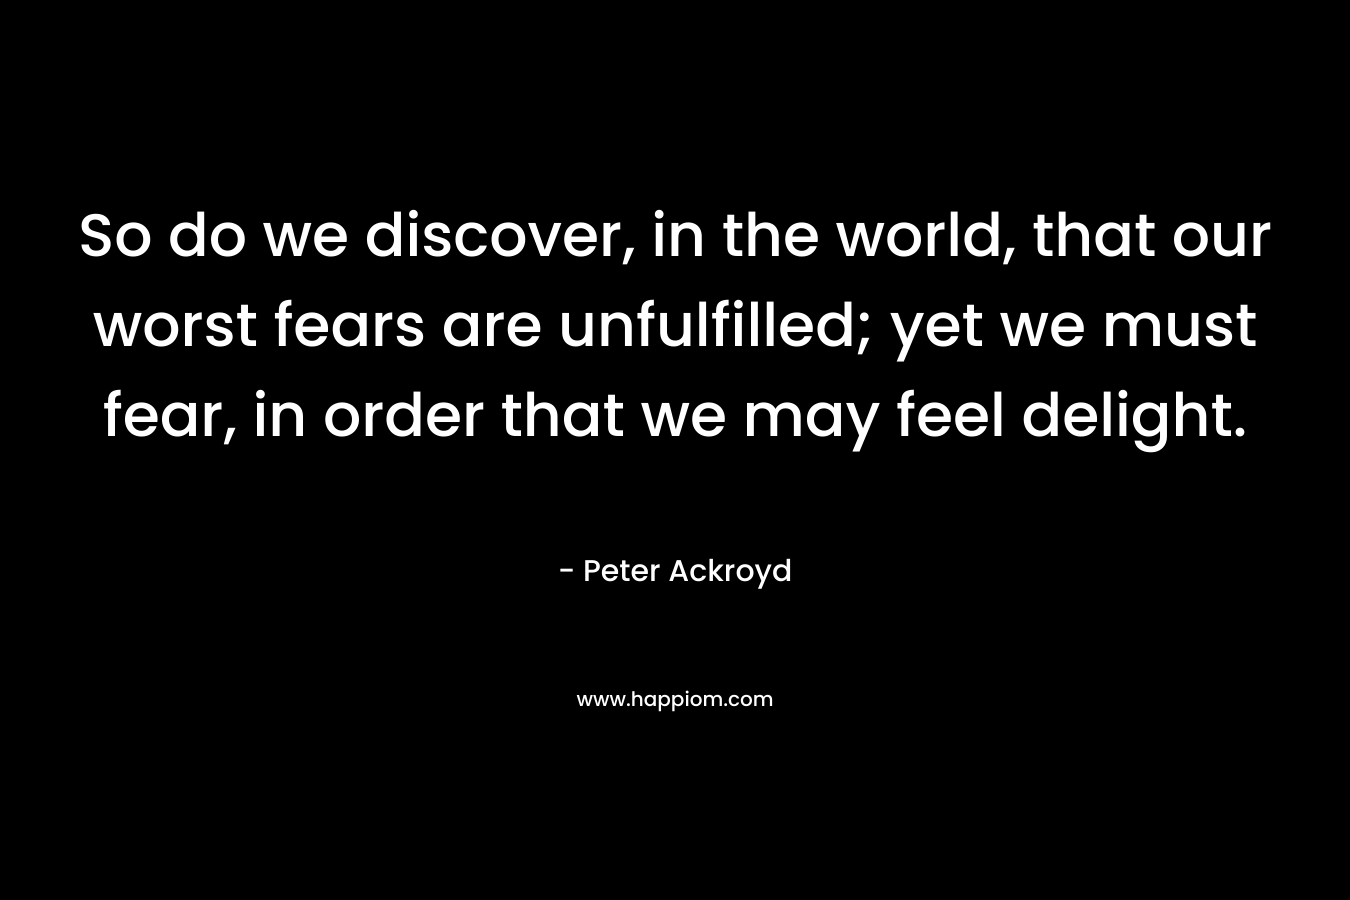 So do we discover, in the world, that our worst fears are unfulfilled; yet we must fear, in order that we may feel delight. – Peter Ackroyd